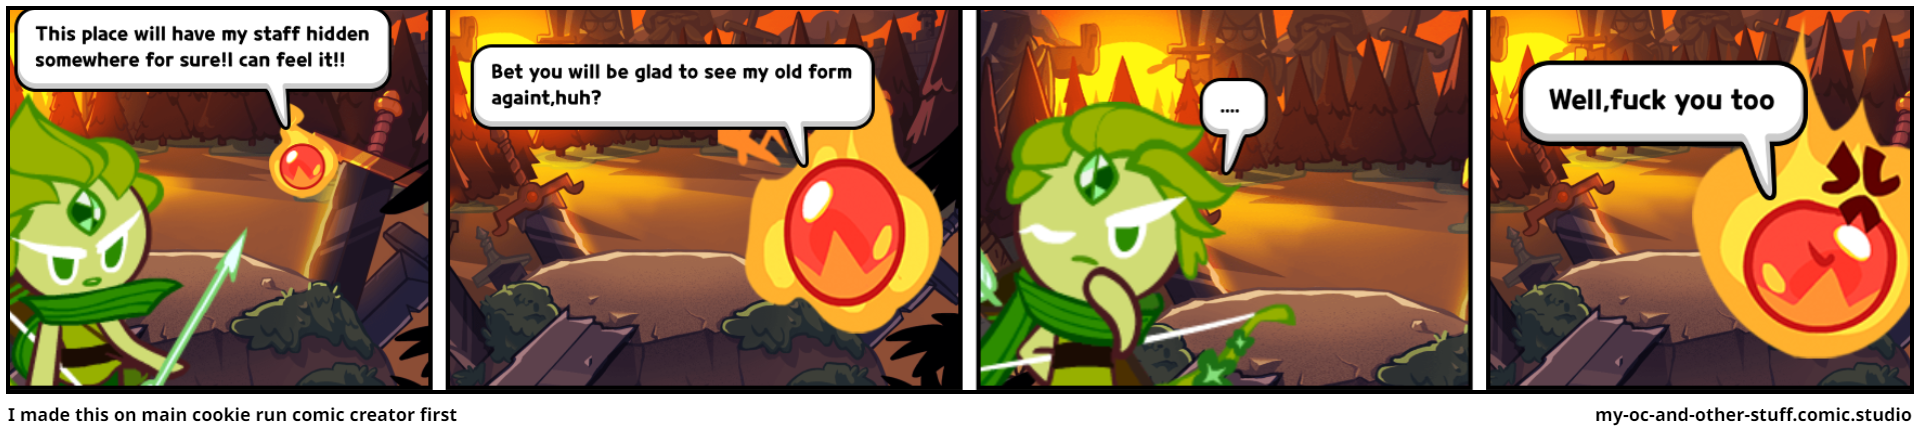 I made this on main cookie run comic creator first